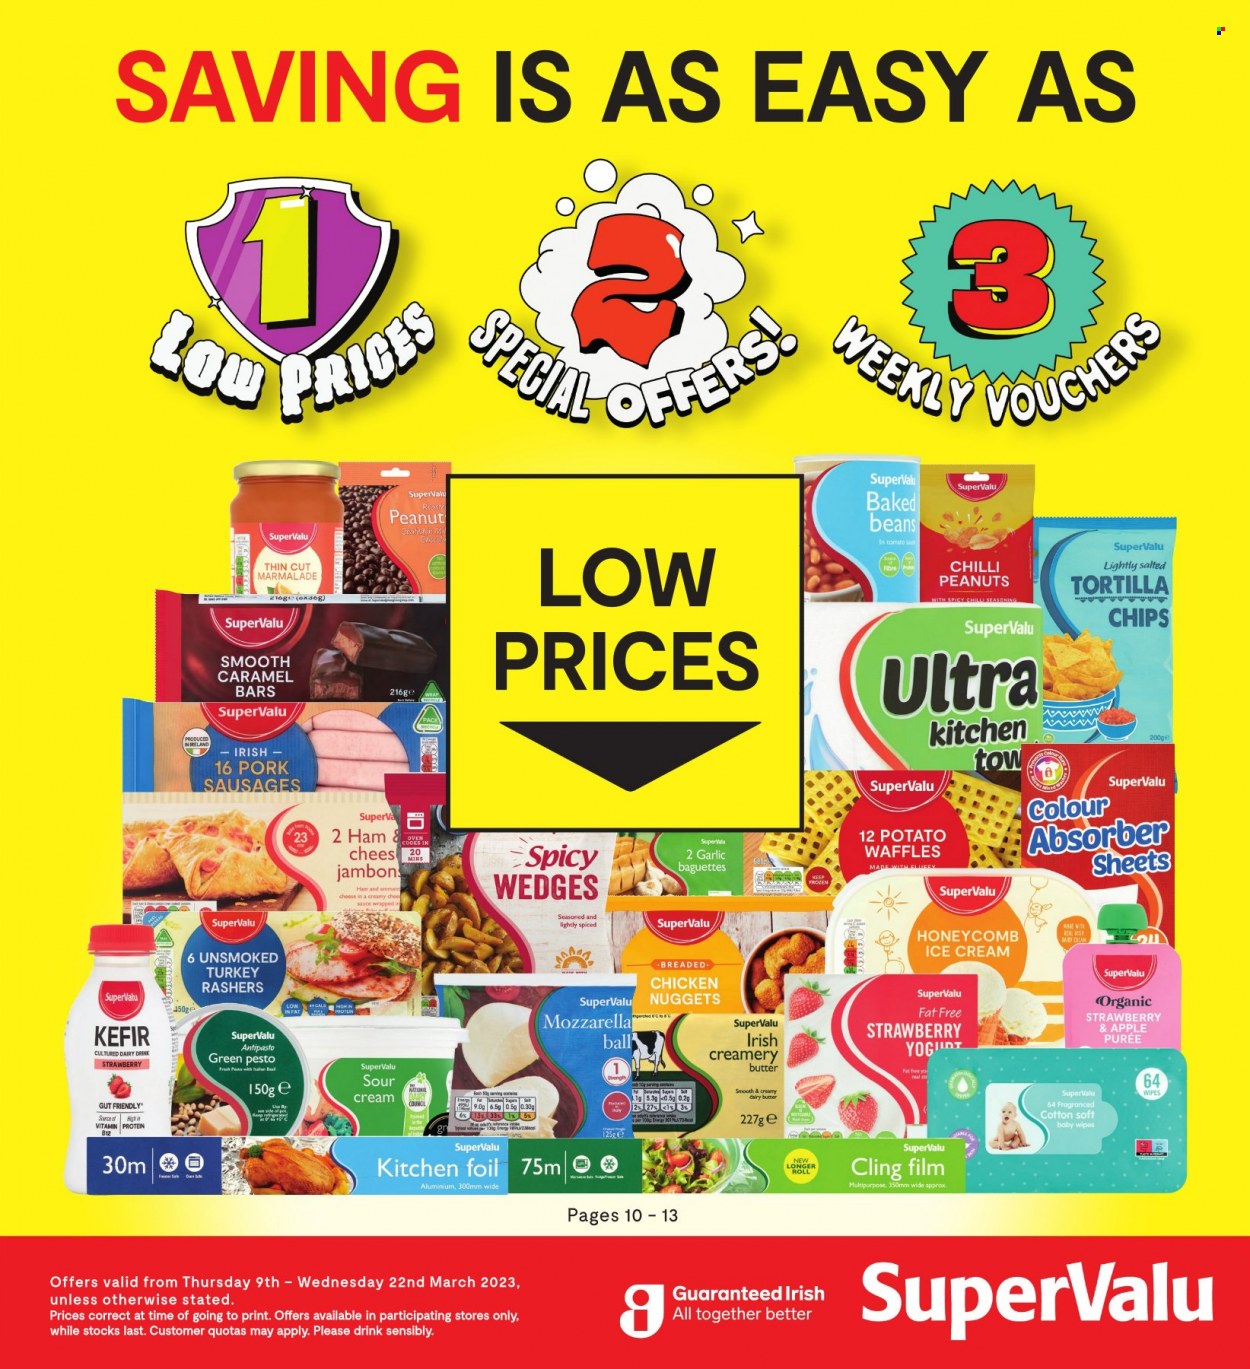 thumbnail - SuperValu offer  - 09.03.2023 - 22.03.2023 - Sales products - baguette, waffles, beans, garlic, nuggets, ham, sausage, mozzarella, cheese, kefir, sour cream, ice cream, tortilla chips, baked beans, spice, caramel, pesto, peanuts, wipes, baby wipes. Page 1.